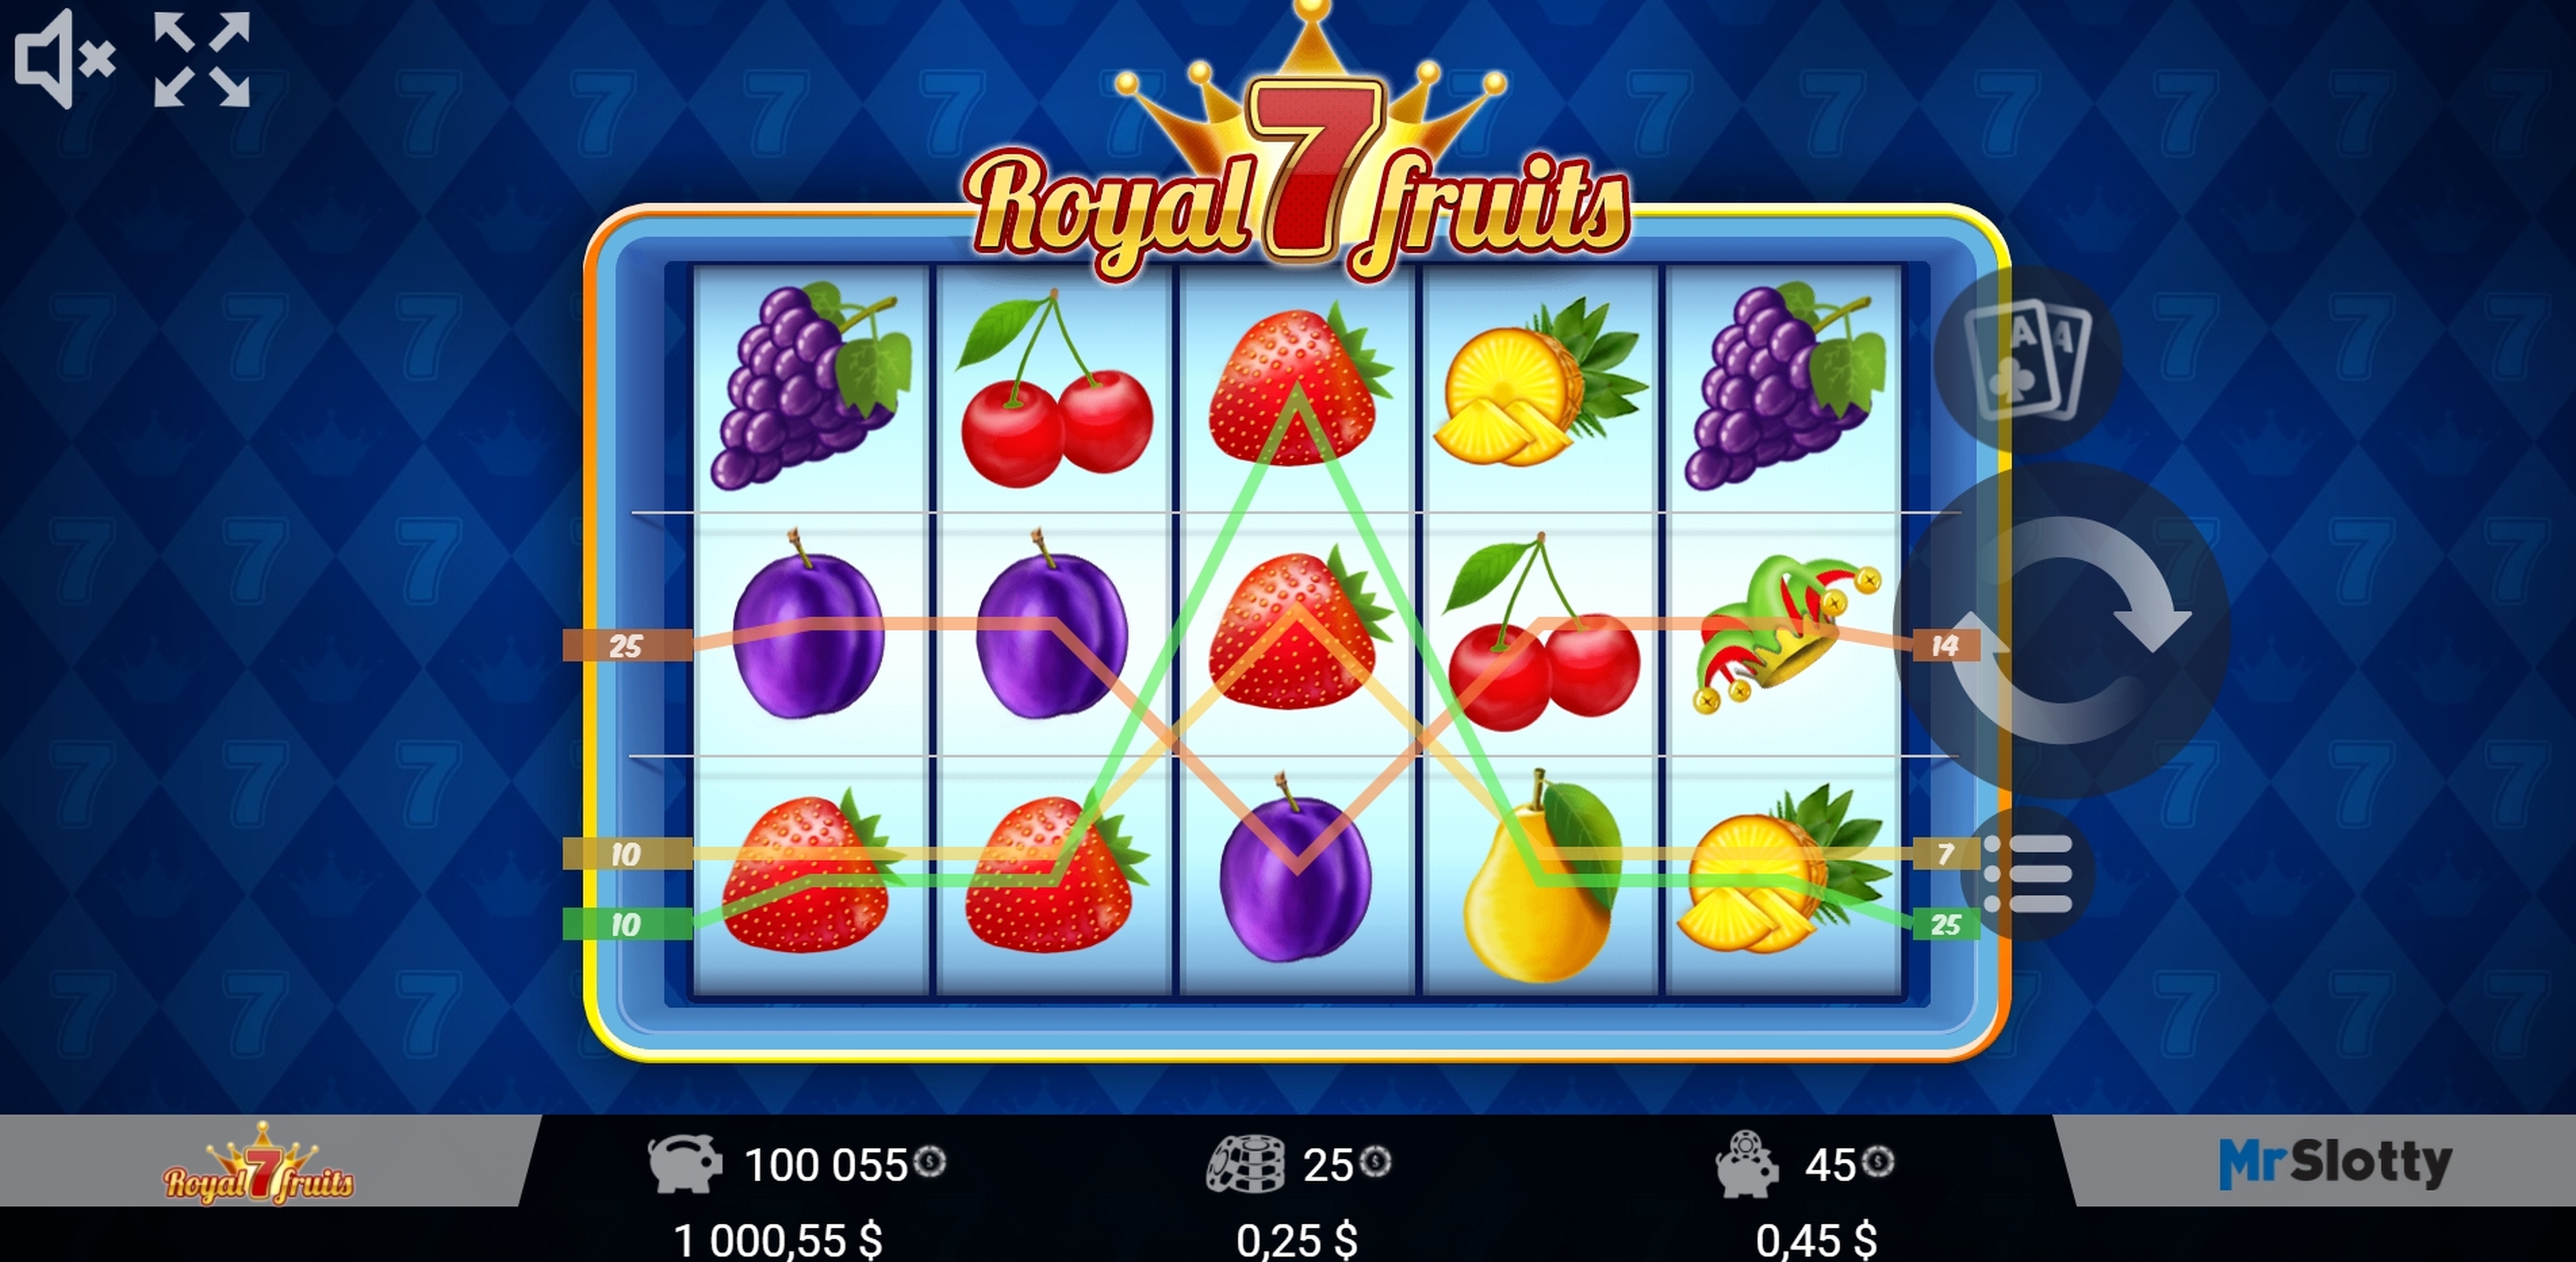 Win Money in Royal 7 Fruits Free Slot Game by Mr Slotty